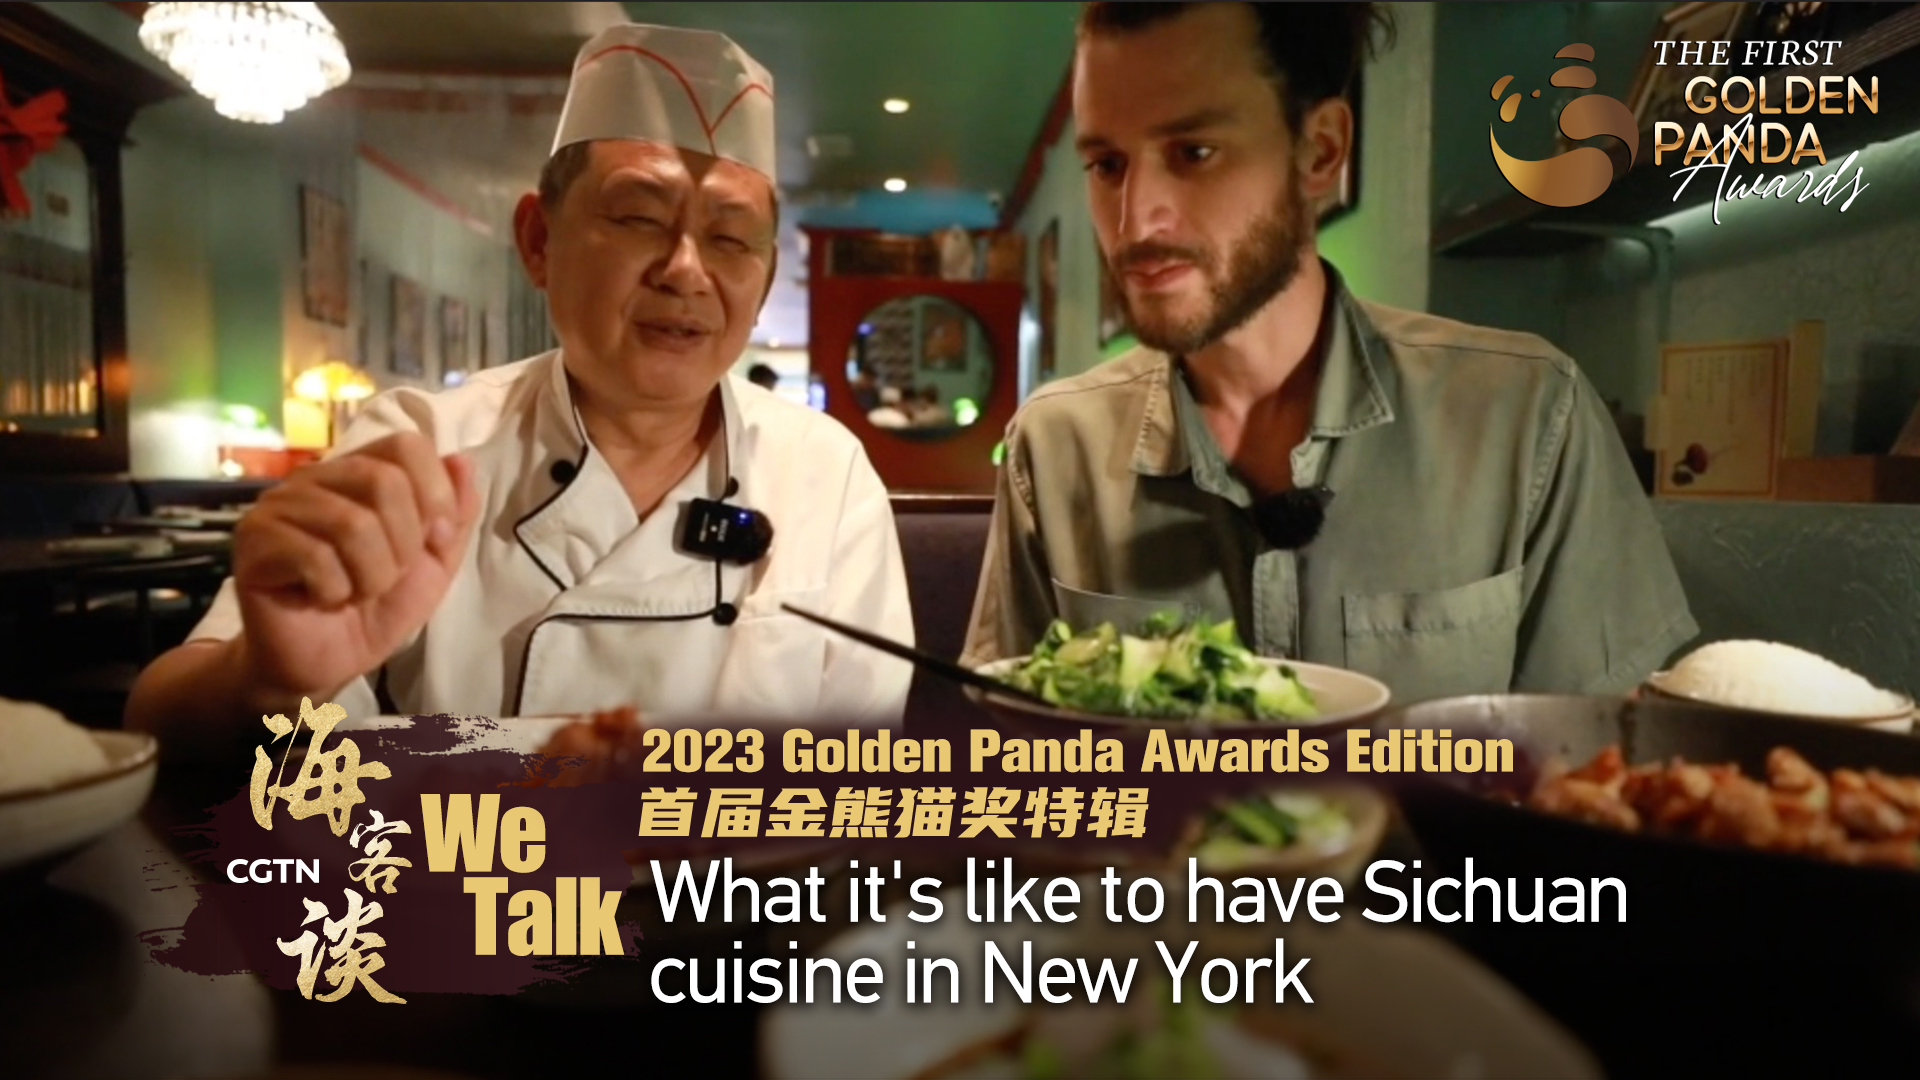 What it's like to have Sichuan cuisine in New York